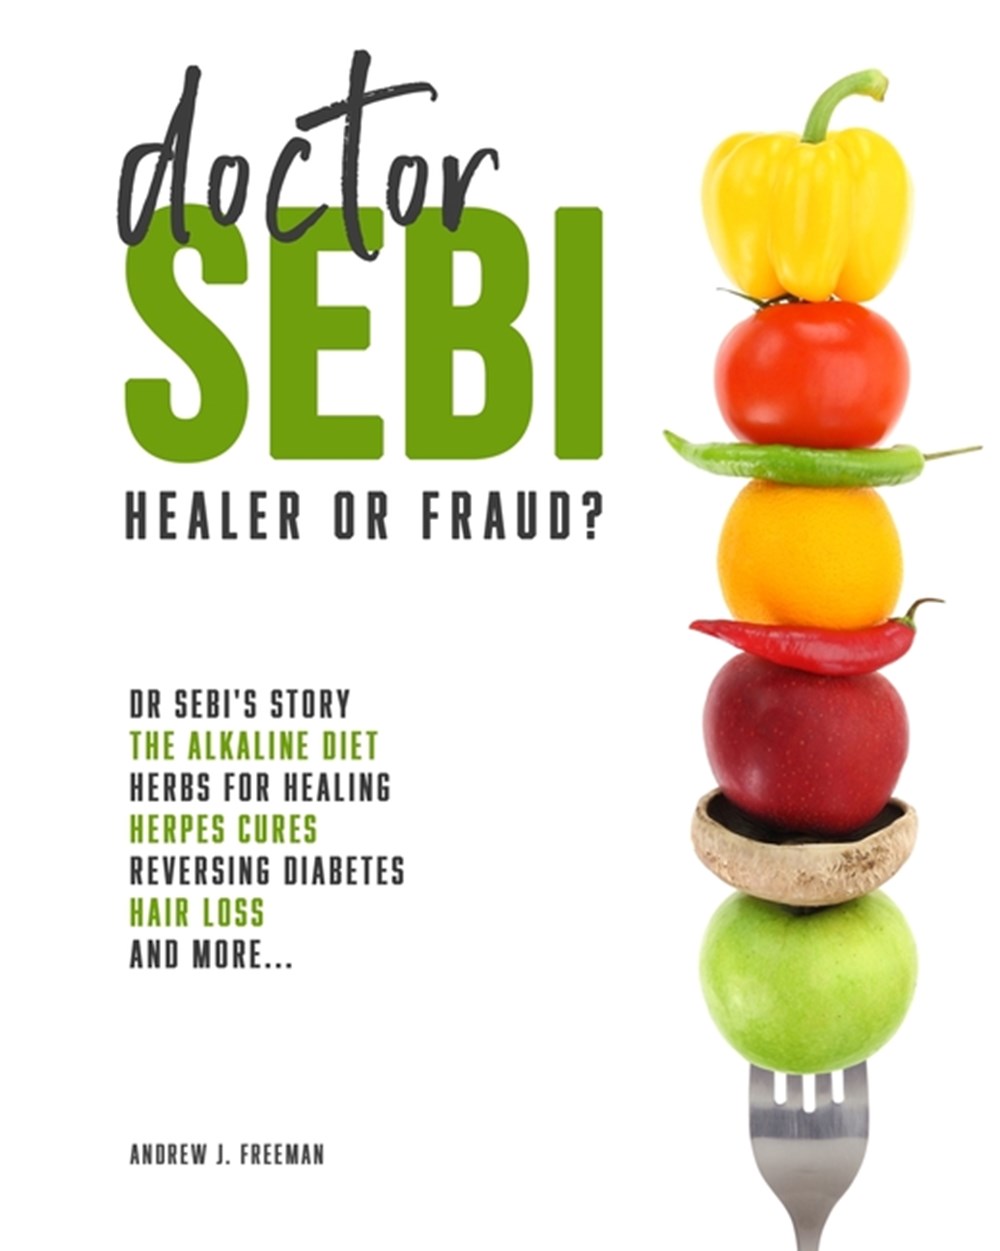 Doctor Sebi Healer or Fraud? The definitive guide containing Dr Sebi's Story, Recipes for the Alkali